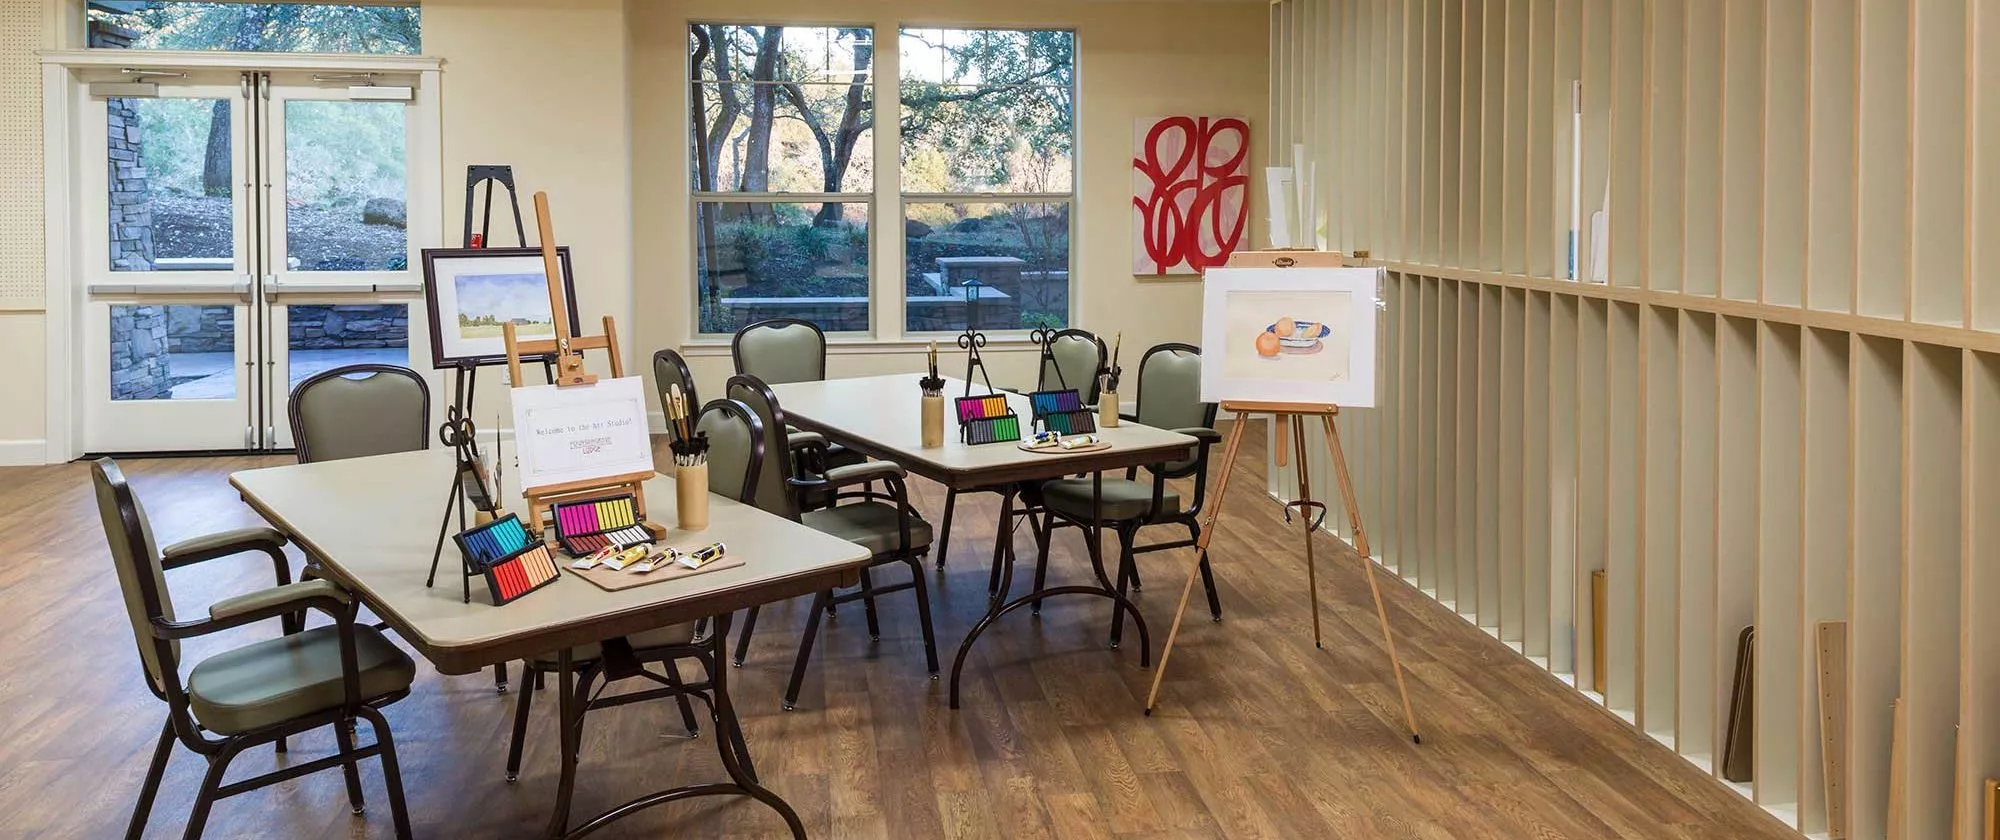 Fountaingrove Lodge art studio with painting supplies, brushes and easel